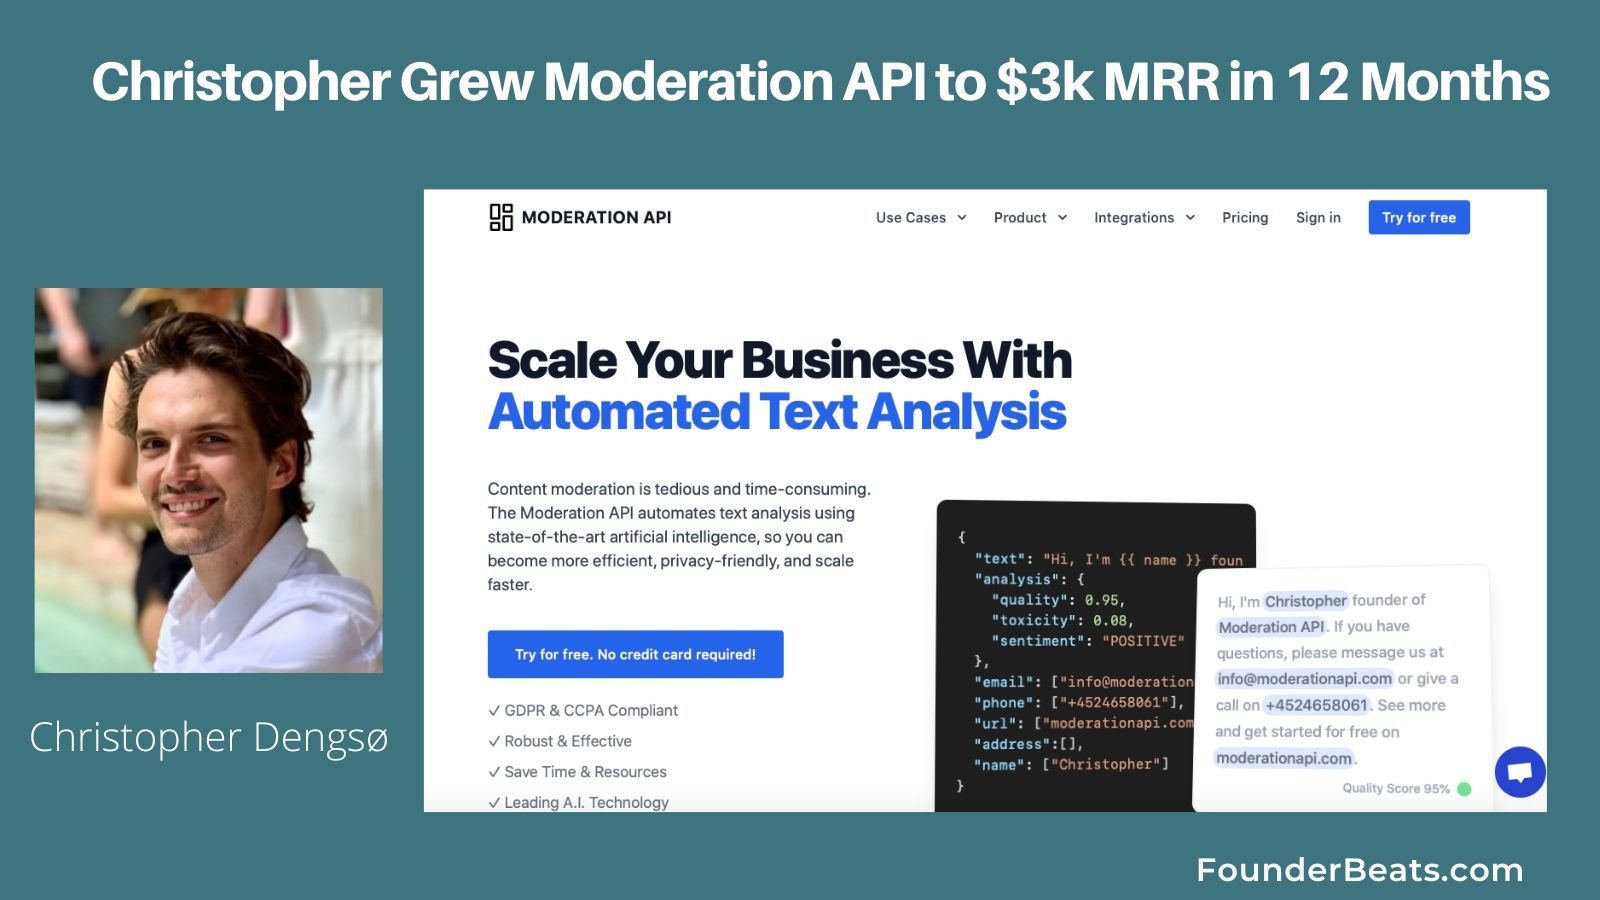 Christopher Grew Moderation API to $3K MRR in 12 Months